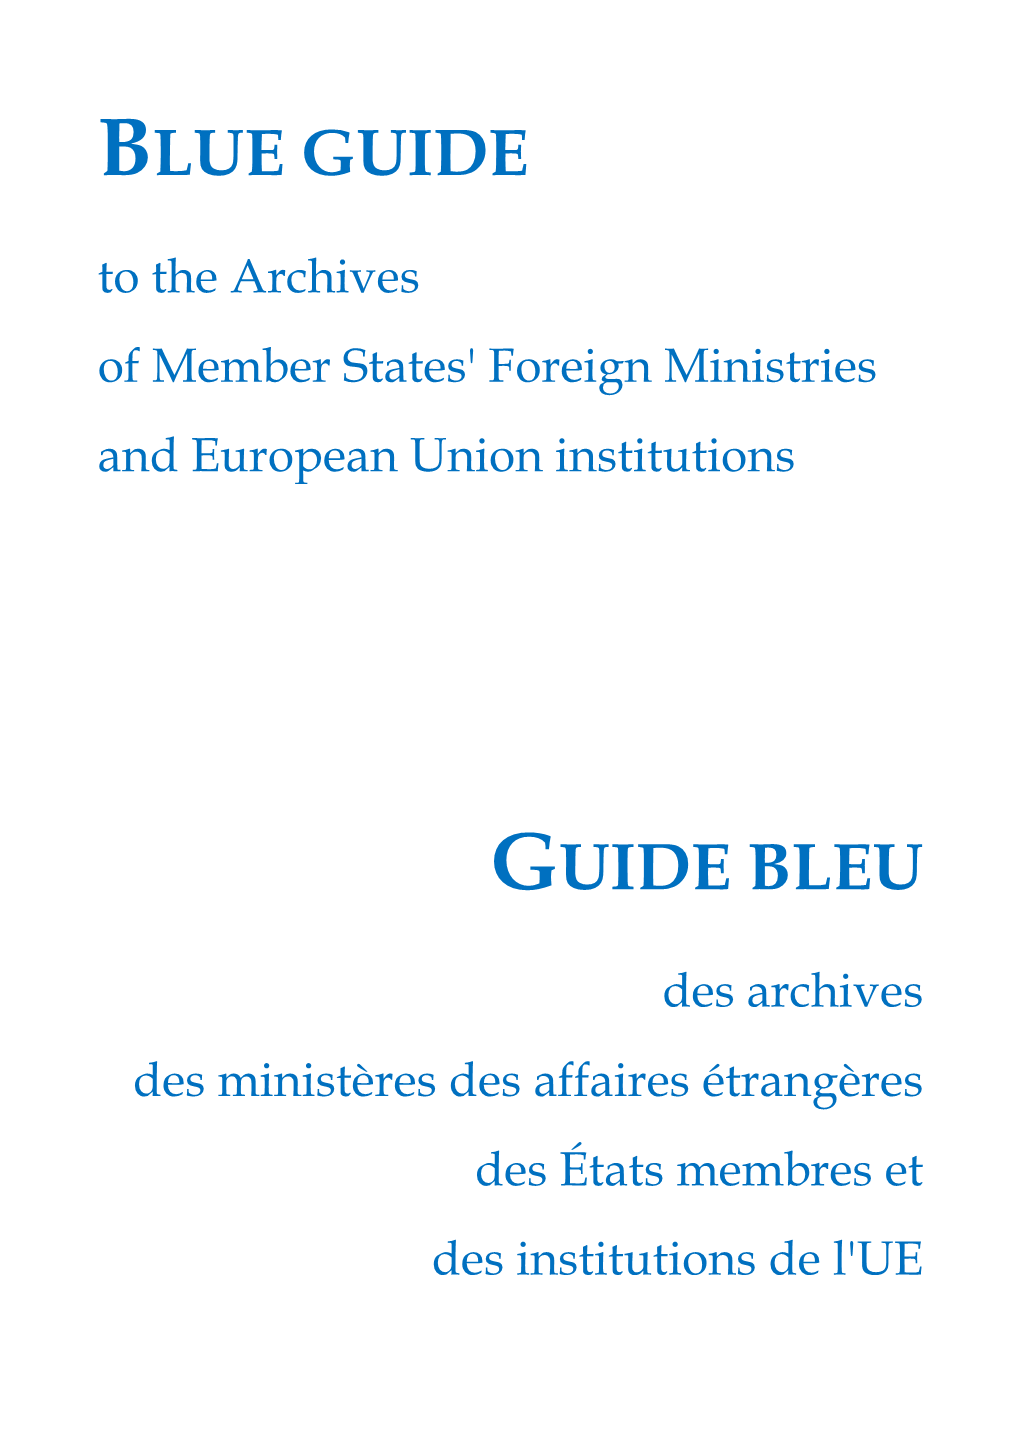 BLUE GUIDE to the Archives of Member States' Foreign Ministries and European Union Institutions